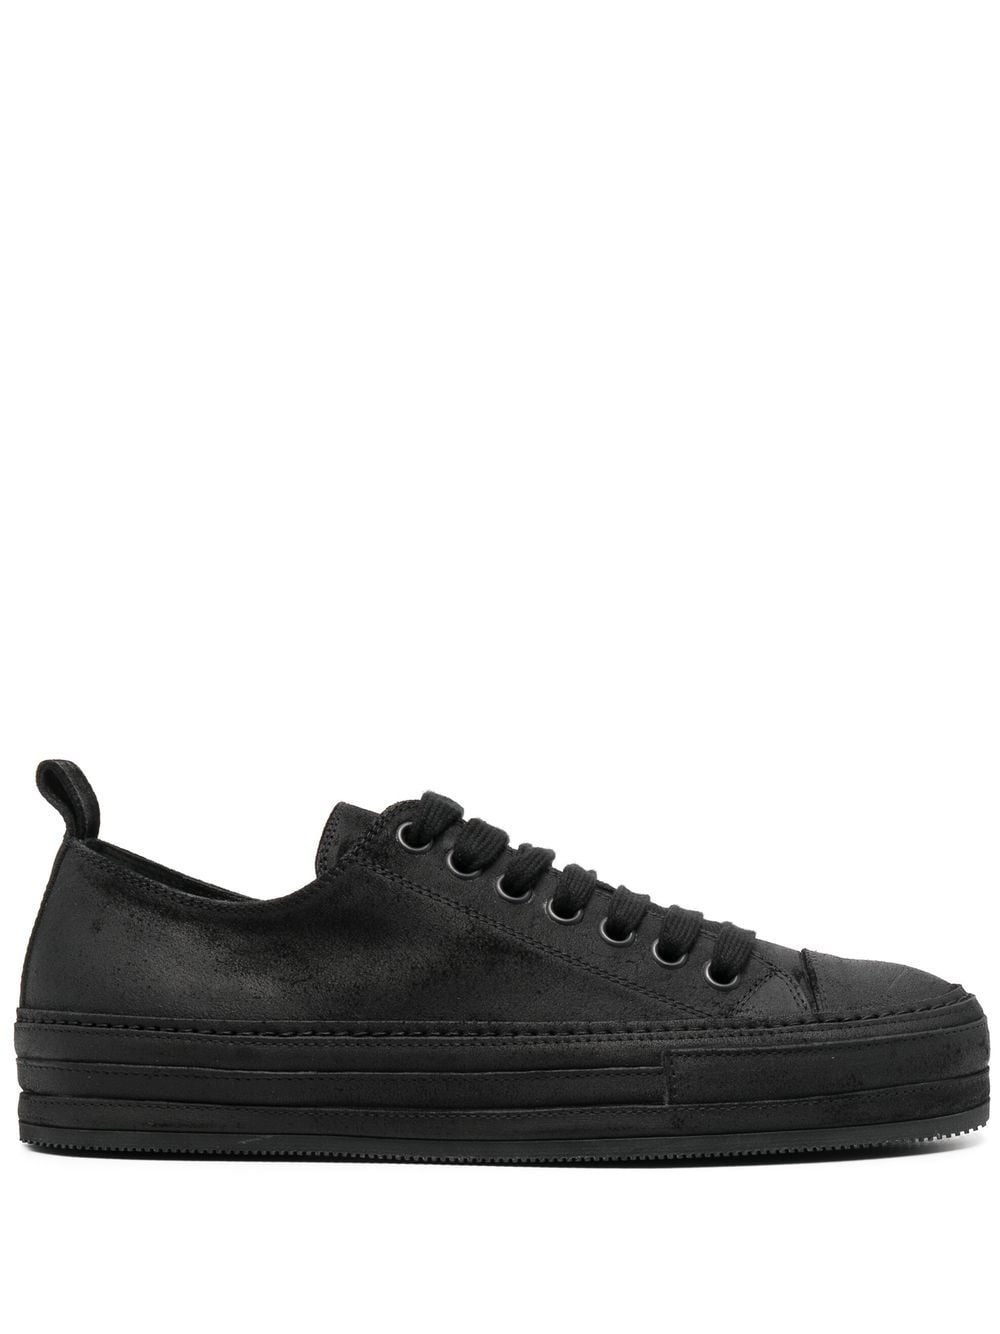 Ann Demeulemeester leather low-top sneakers - Black von Ann Demeulemeester